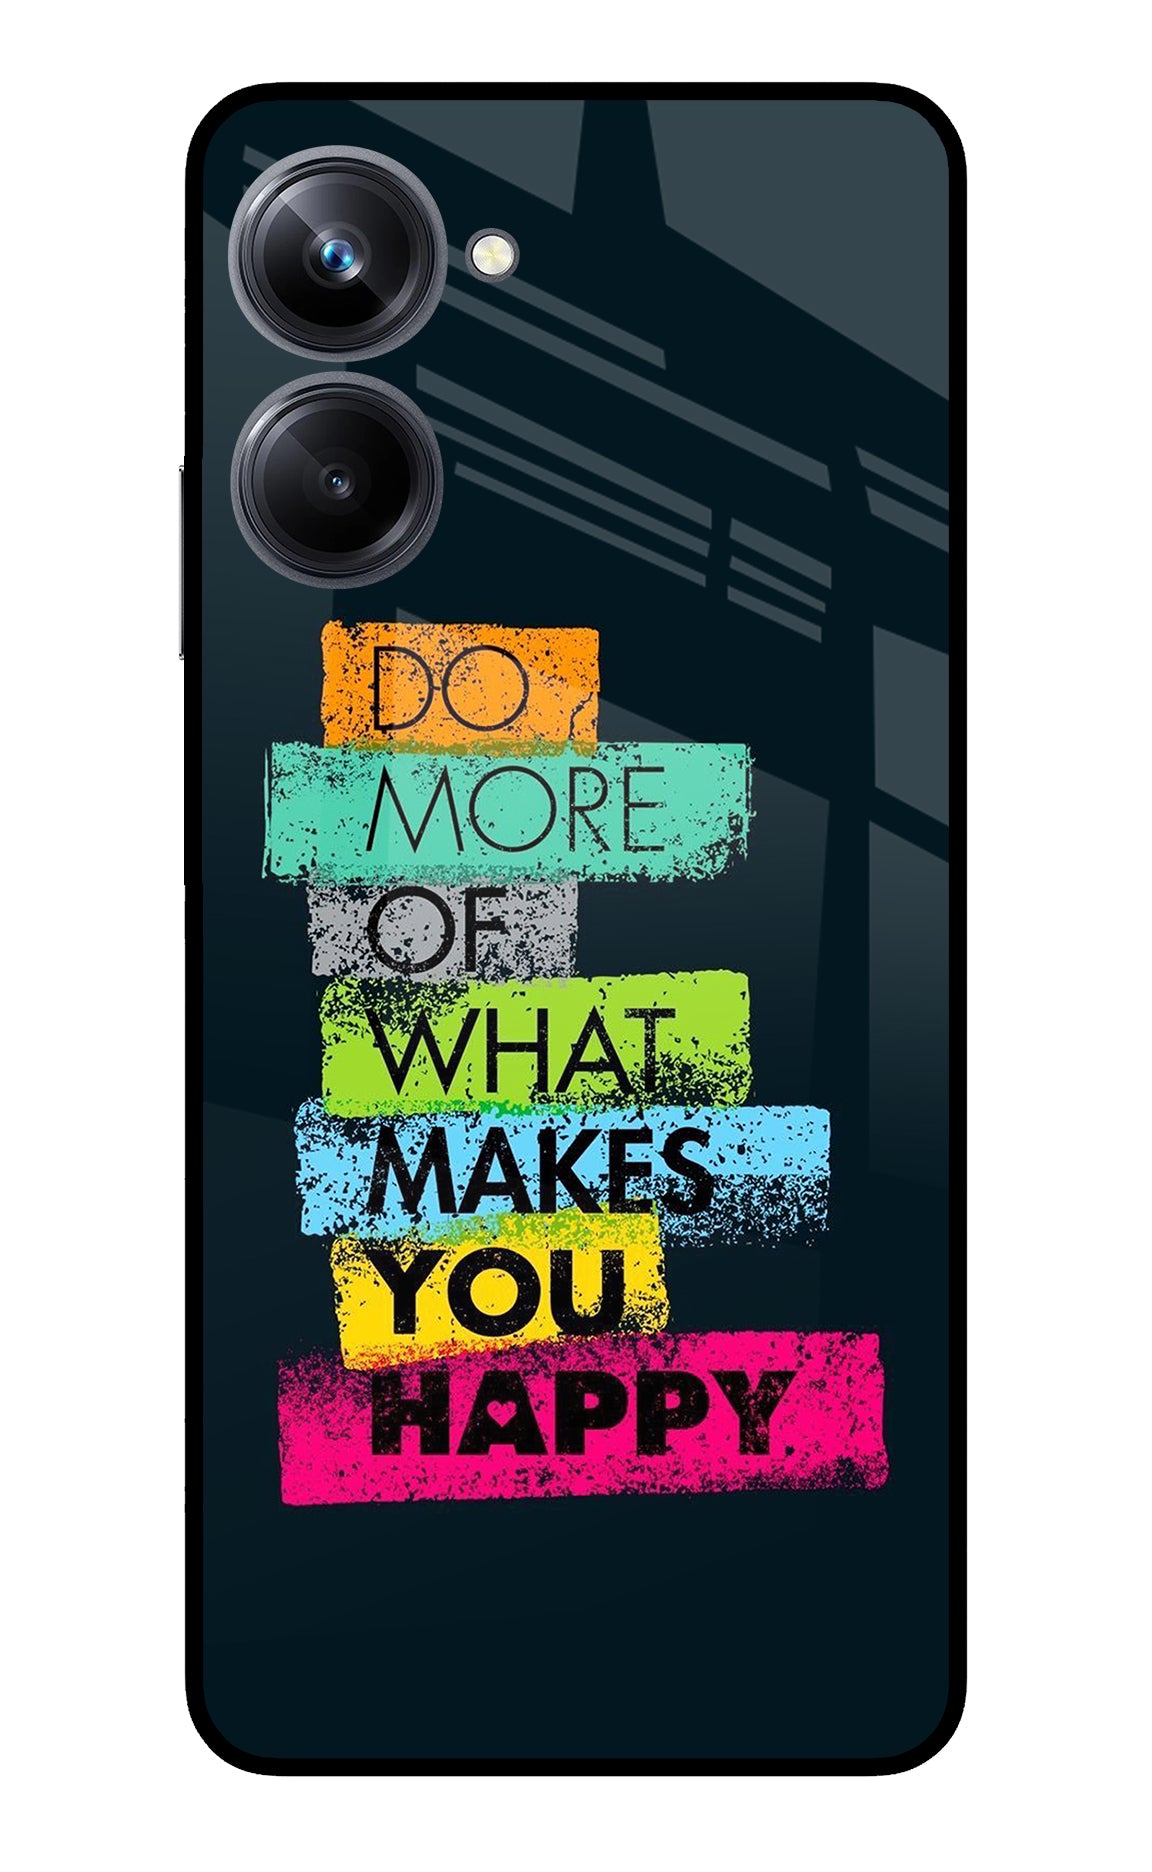 Do More Of What Makes You Happy Realme 10 Pro 5G Back Cover